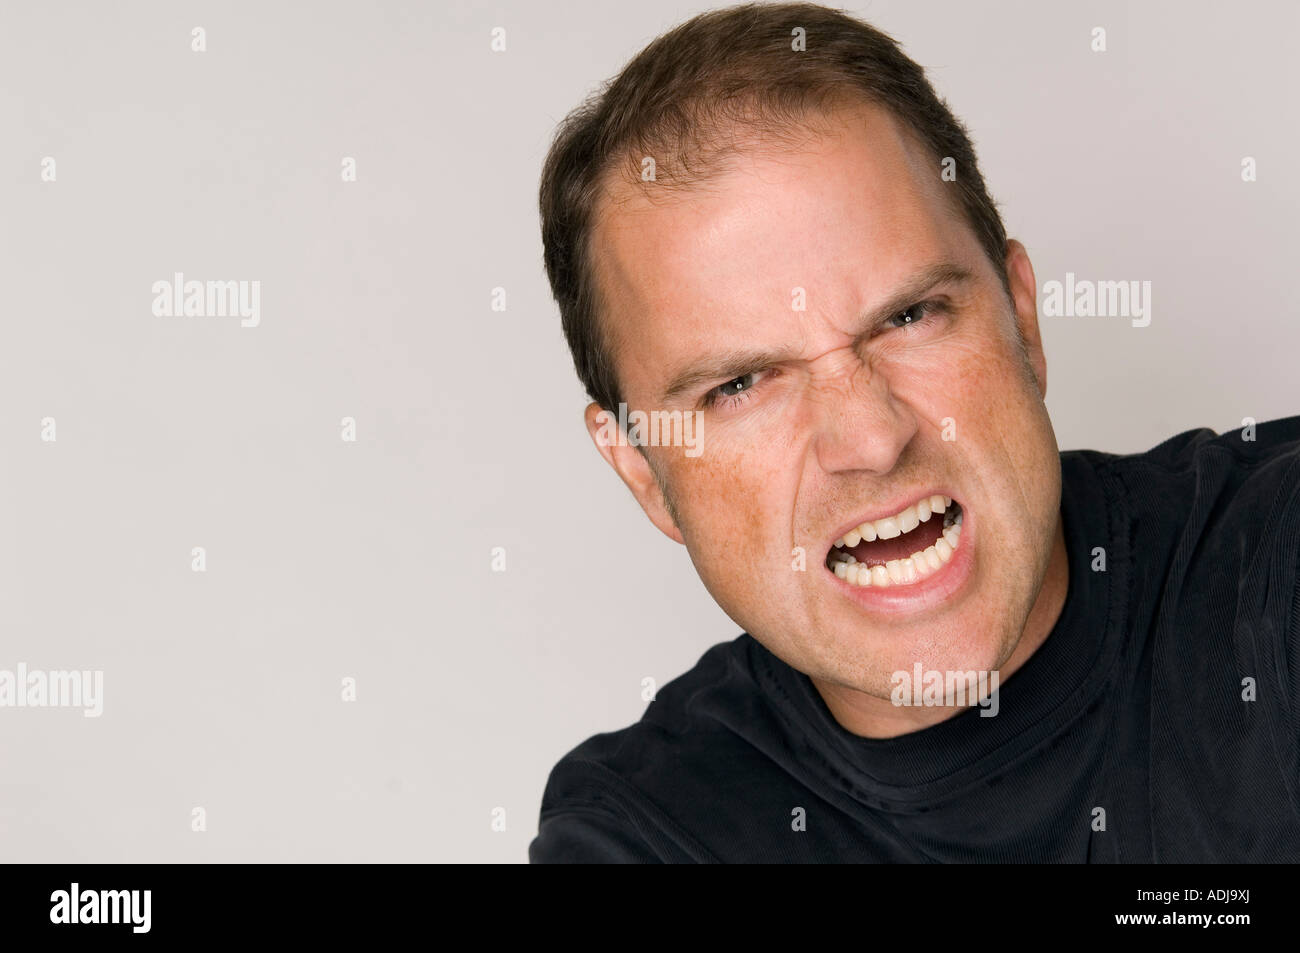 Close up of angry man's face yelling. Stock Photo